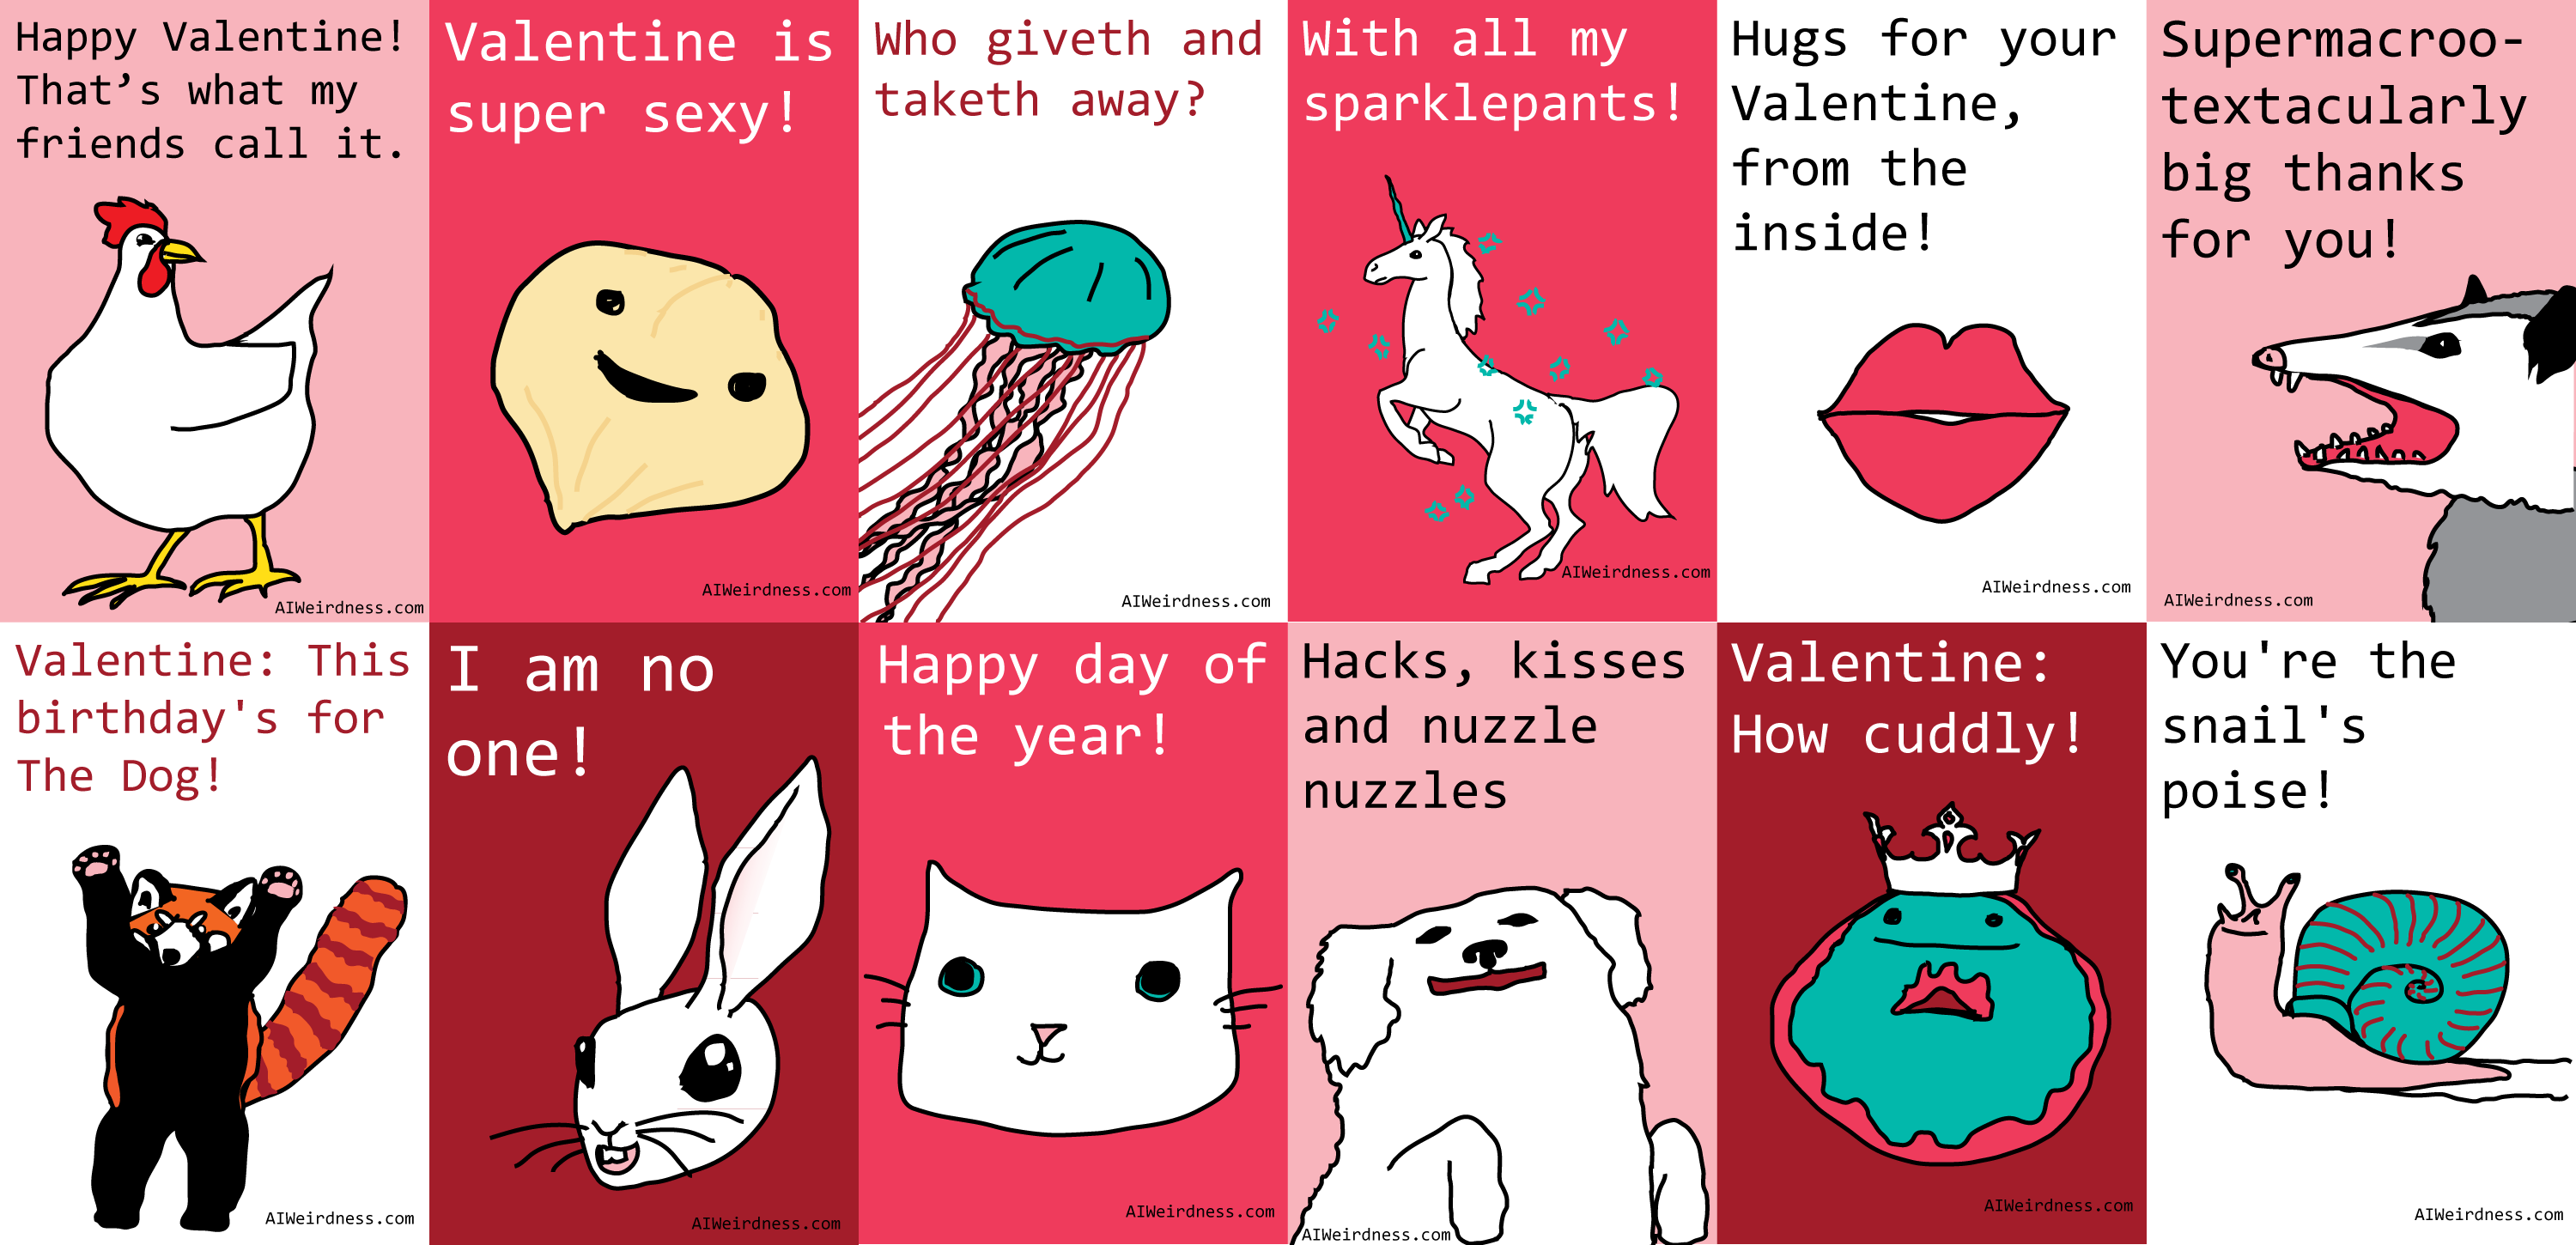 How to Design Your Own Valentine Meme Online